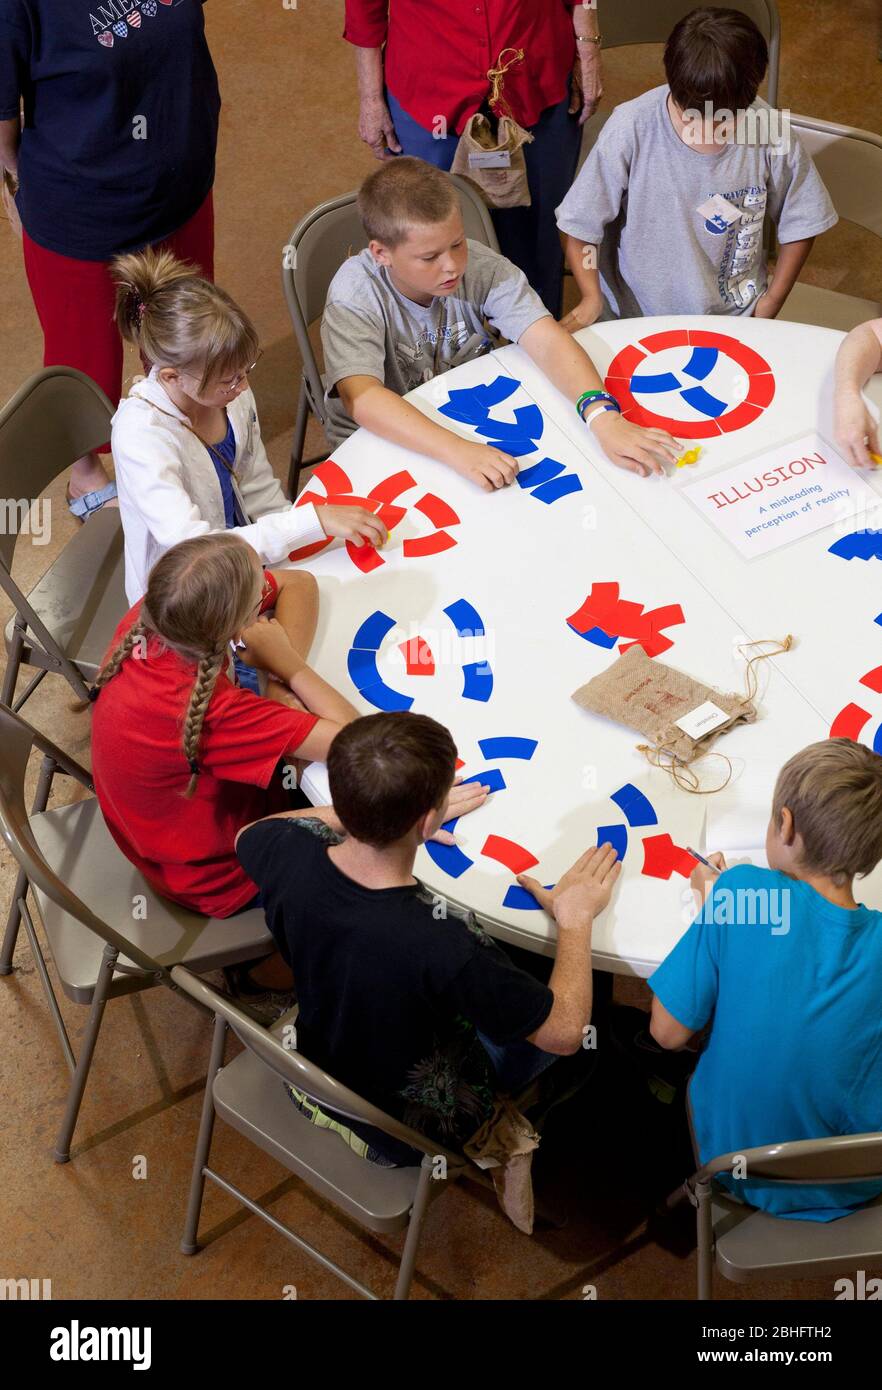 Georgetown Texas USA, August 17 2012: Children play game with American flag-colored red and blue cards at 'Vacation Liberty School' that teaches children ages 7-12 'the benefits of liberty from the perspective of faith, hope and charity', ideas championed by the USA's founding fathers when creating the Declaration of Independence, Bill of Rights and the Constitution. Although formed as a non-political program, it does advocate the Tea Party-like ideals of fiscal responsibility, free markets and limited government. The name is a take-off on vacation Bible school. ©Bob Daemmrich Stock Photo